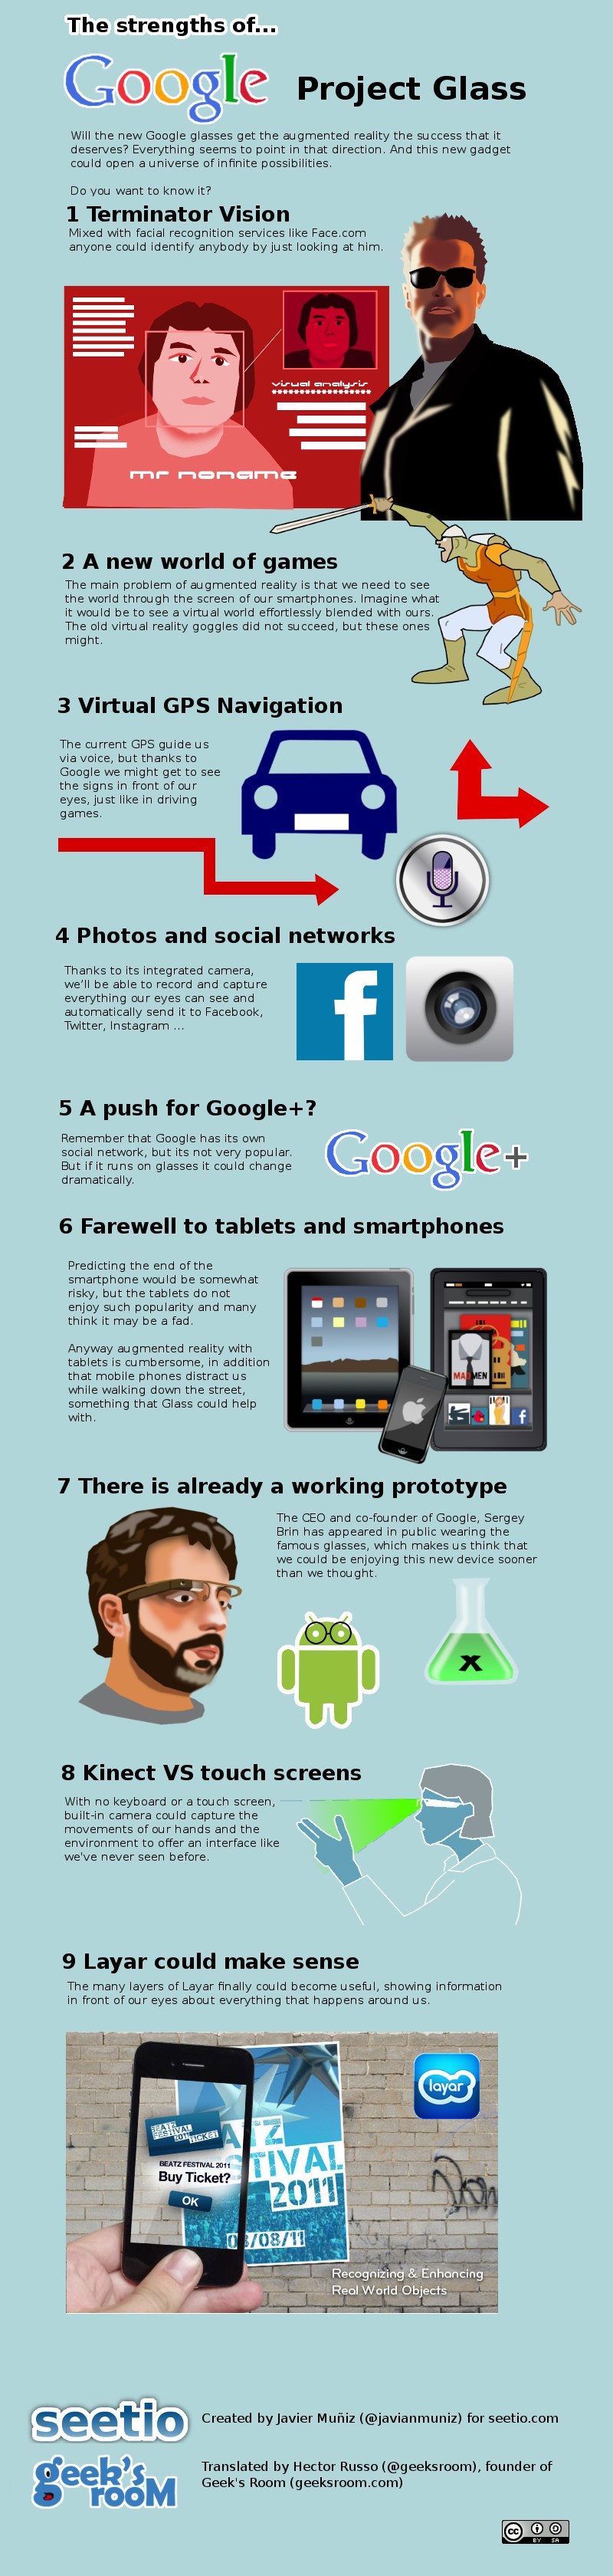 Google Project Glass infographic